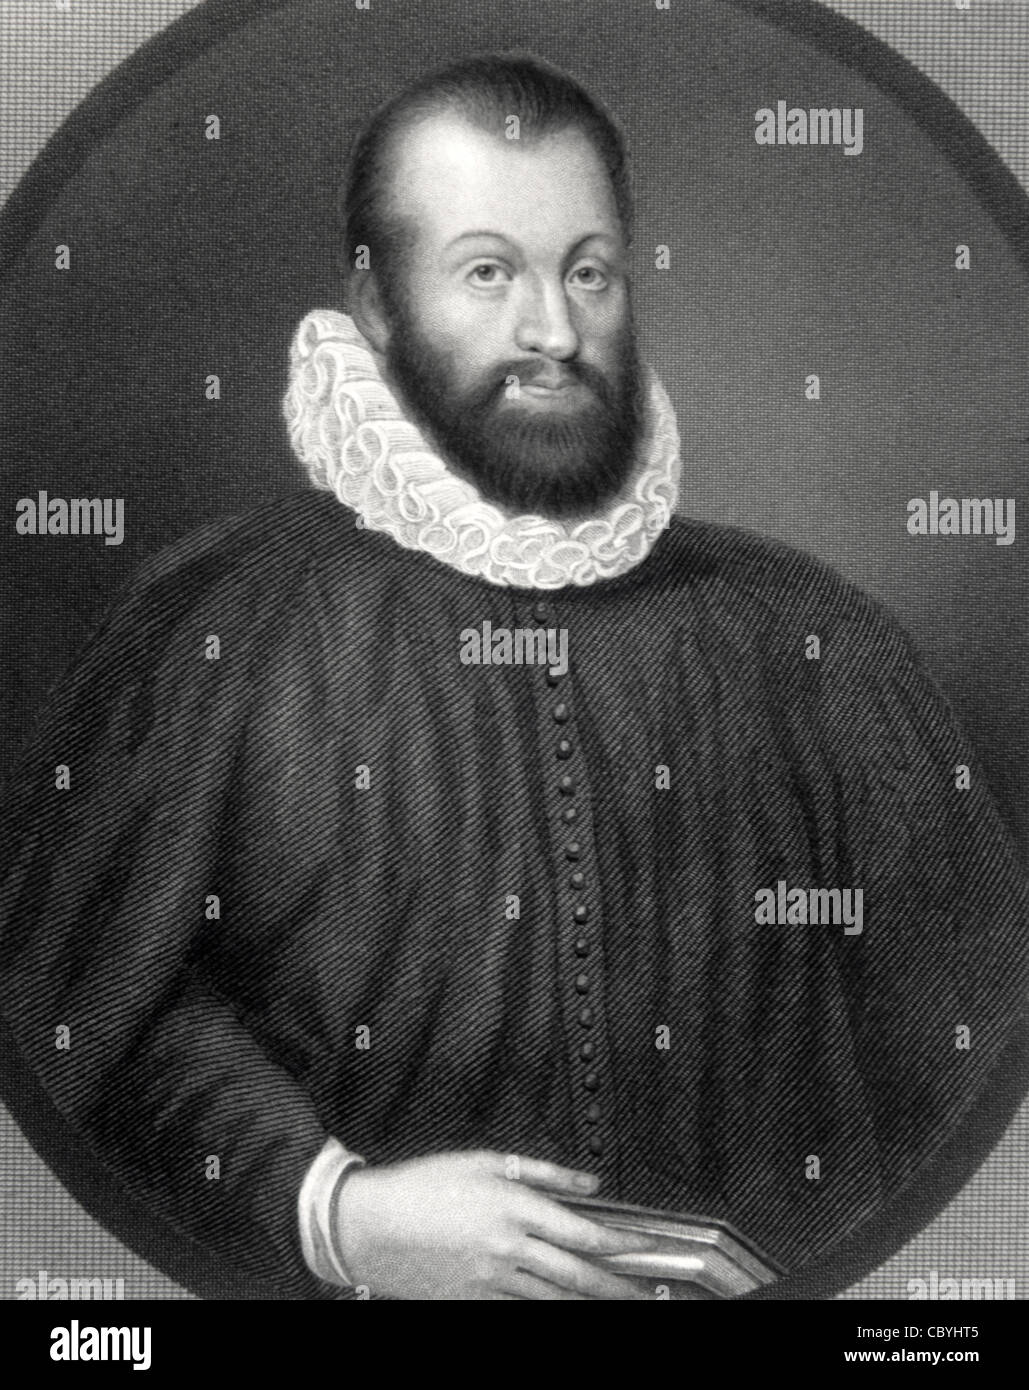 Portrait of George Wishart (c1513-1546), Scottish Religious Reformer and Protestant Martyr. Portrait. Vintage Illustration or Engraving Stock Photo